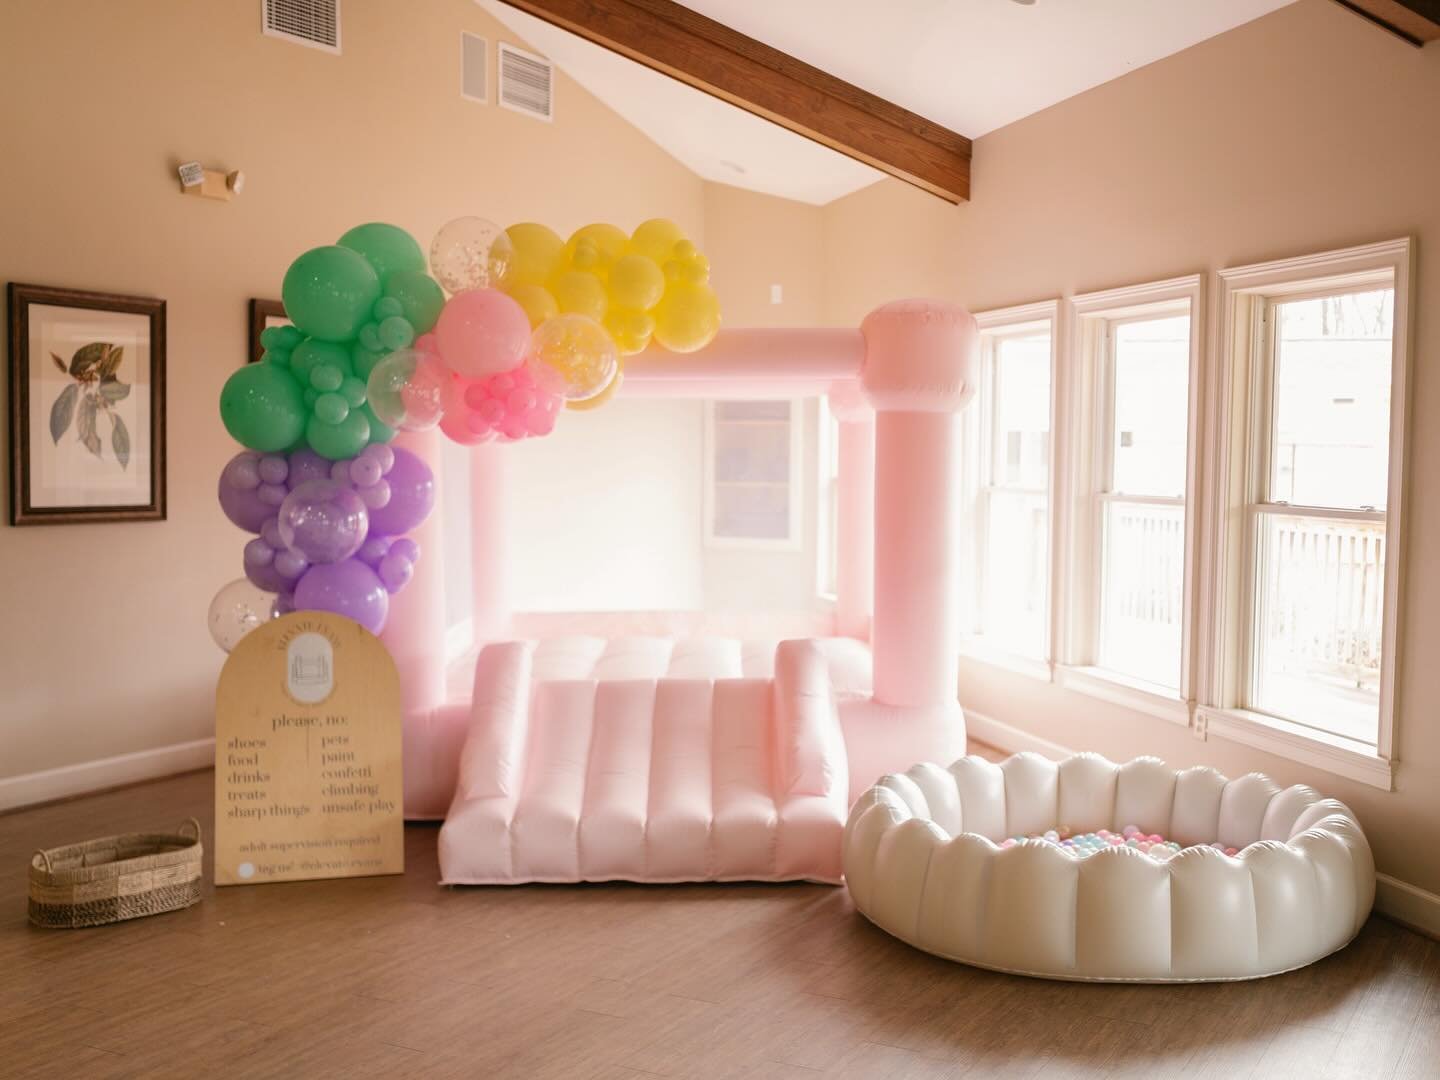 The perfect trio 🫶🏼

-The Little Pink One
-The Little Balloon Garland (+a few feet)
-The Pearl Ball Pit